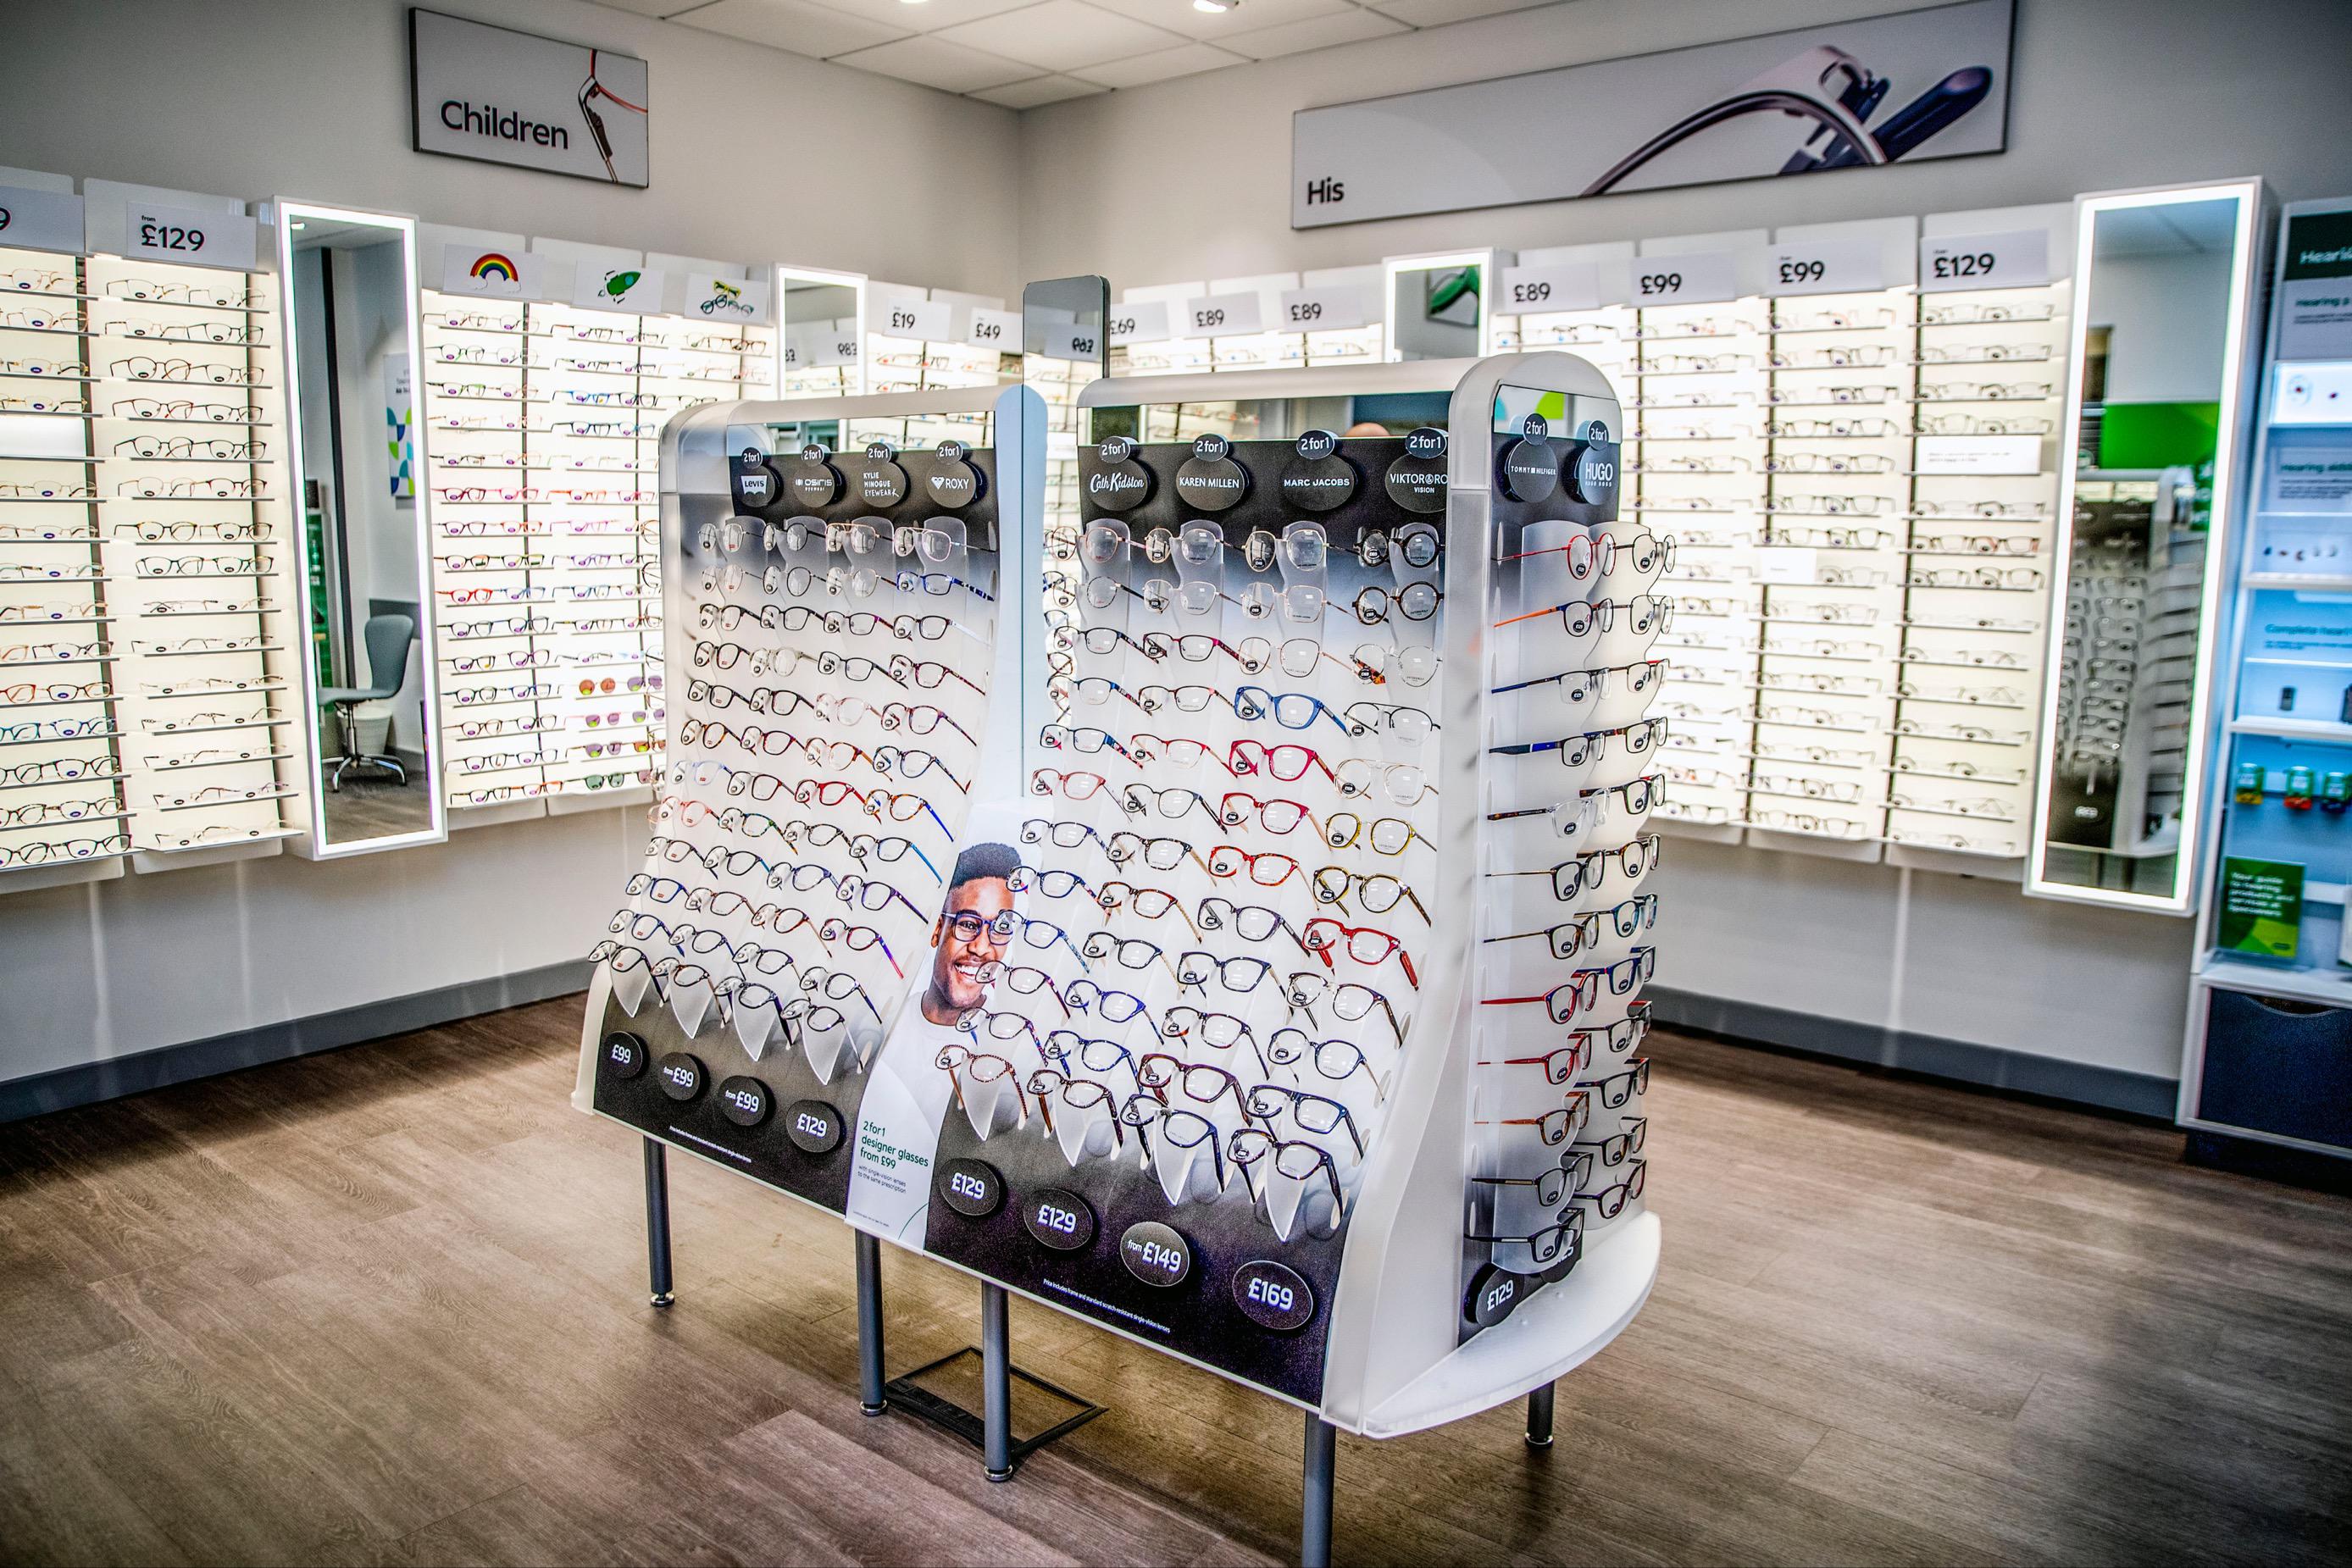 Images Specsavers Opticians and Audiologists - Northampton Weedon Road Sainsbury's